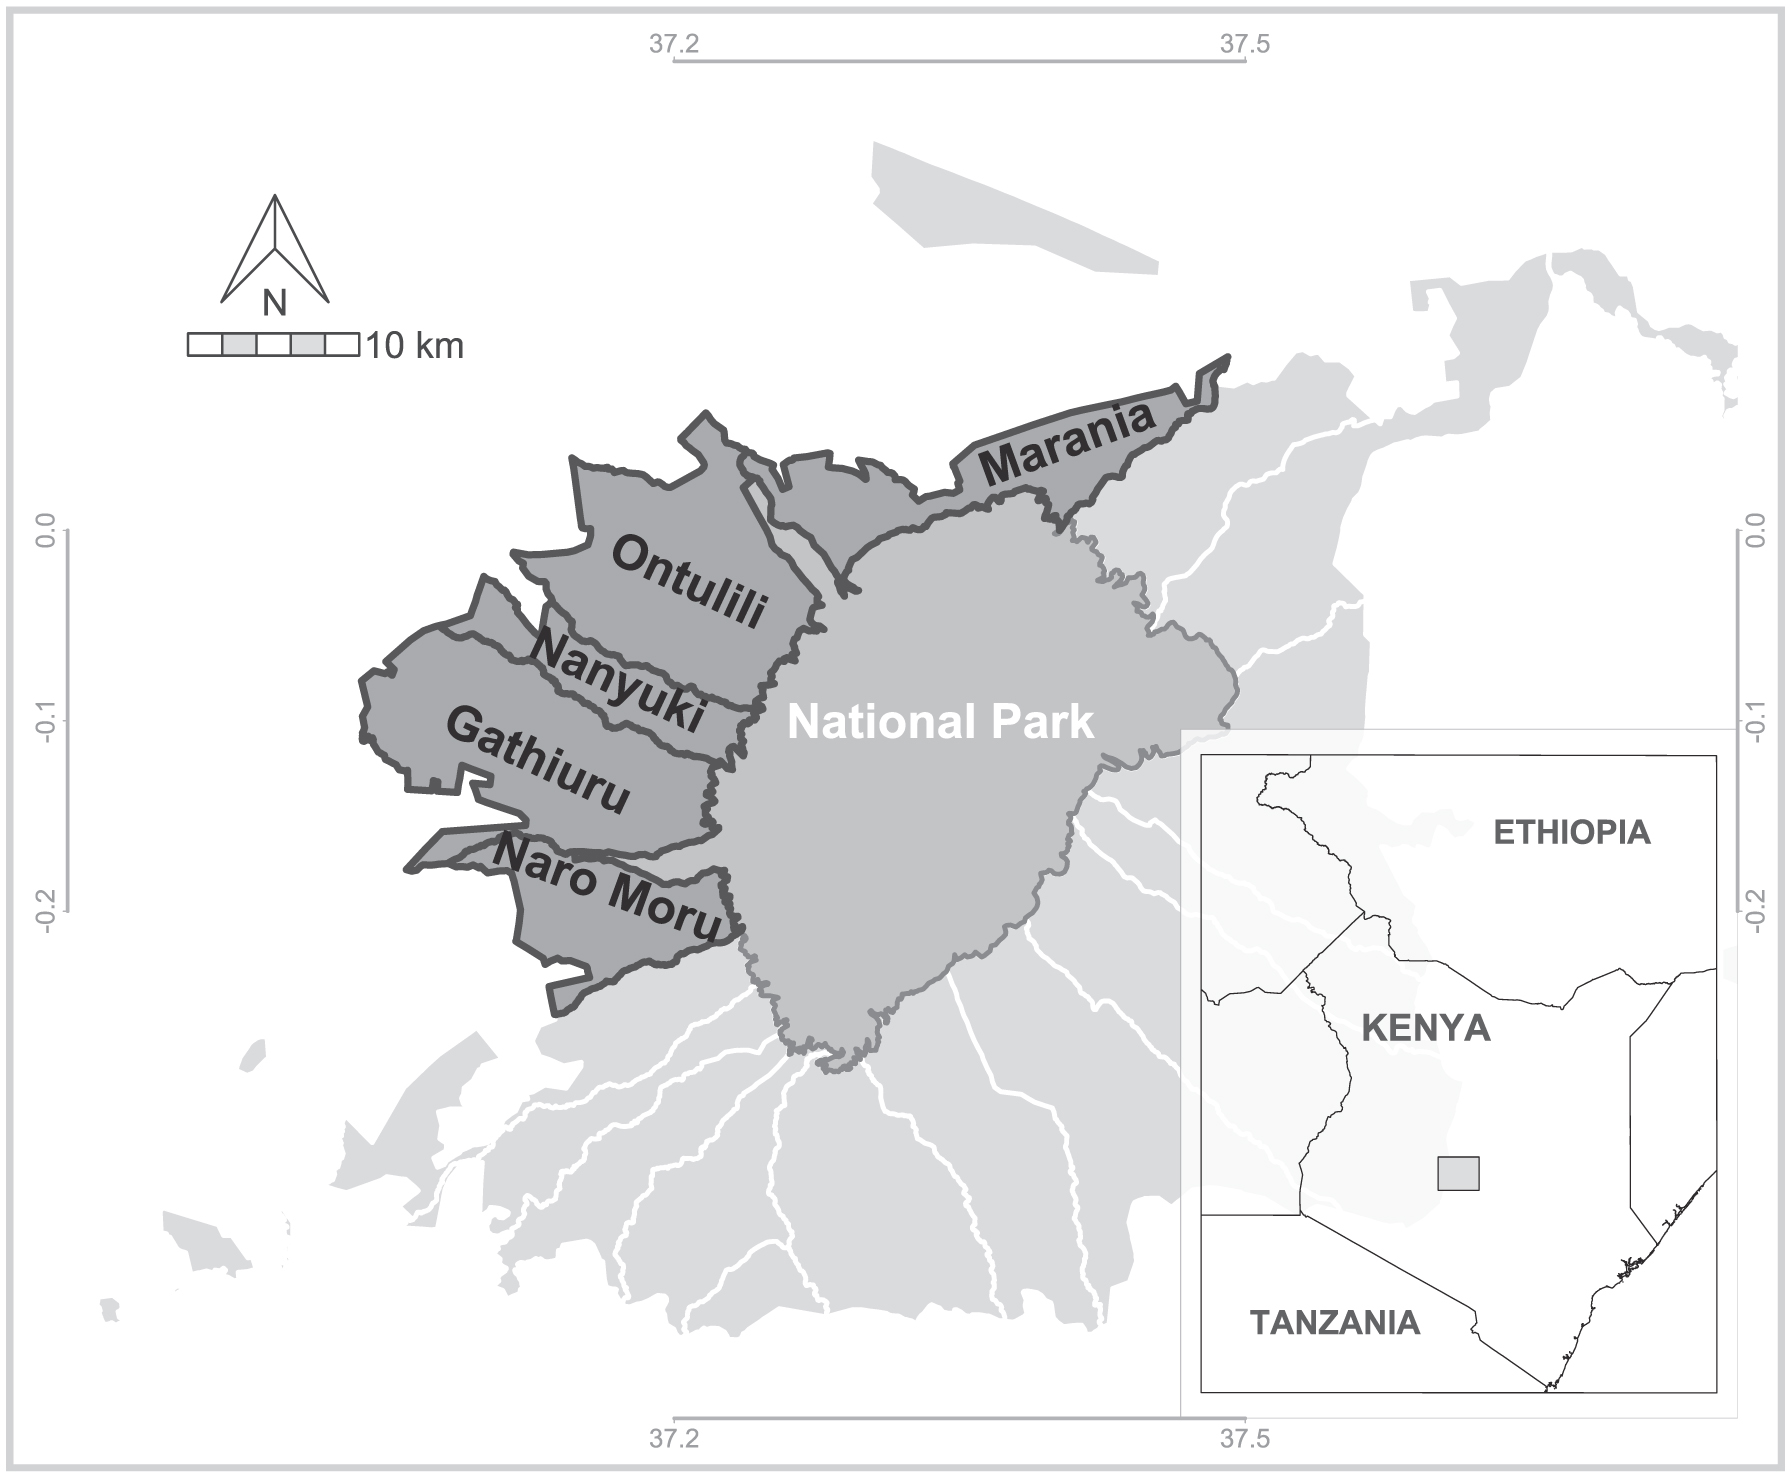 Characterization Of Forest Fires To Support Monitoring And Management Of Mount Kenya Forest